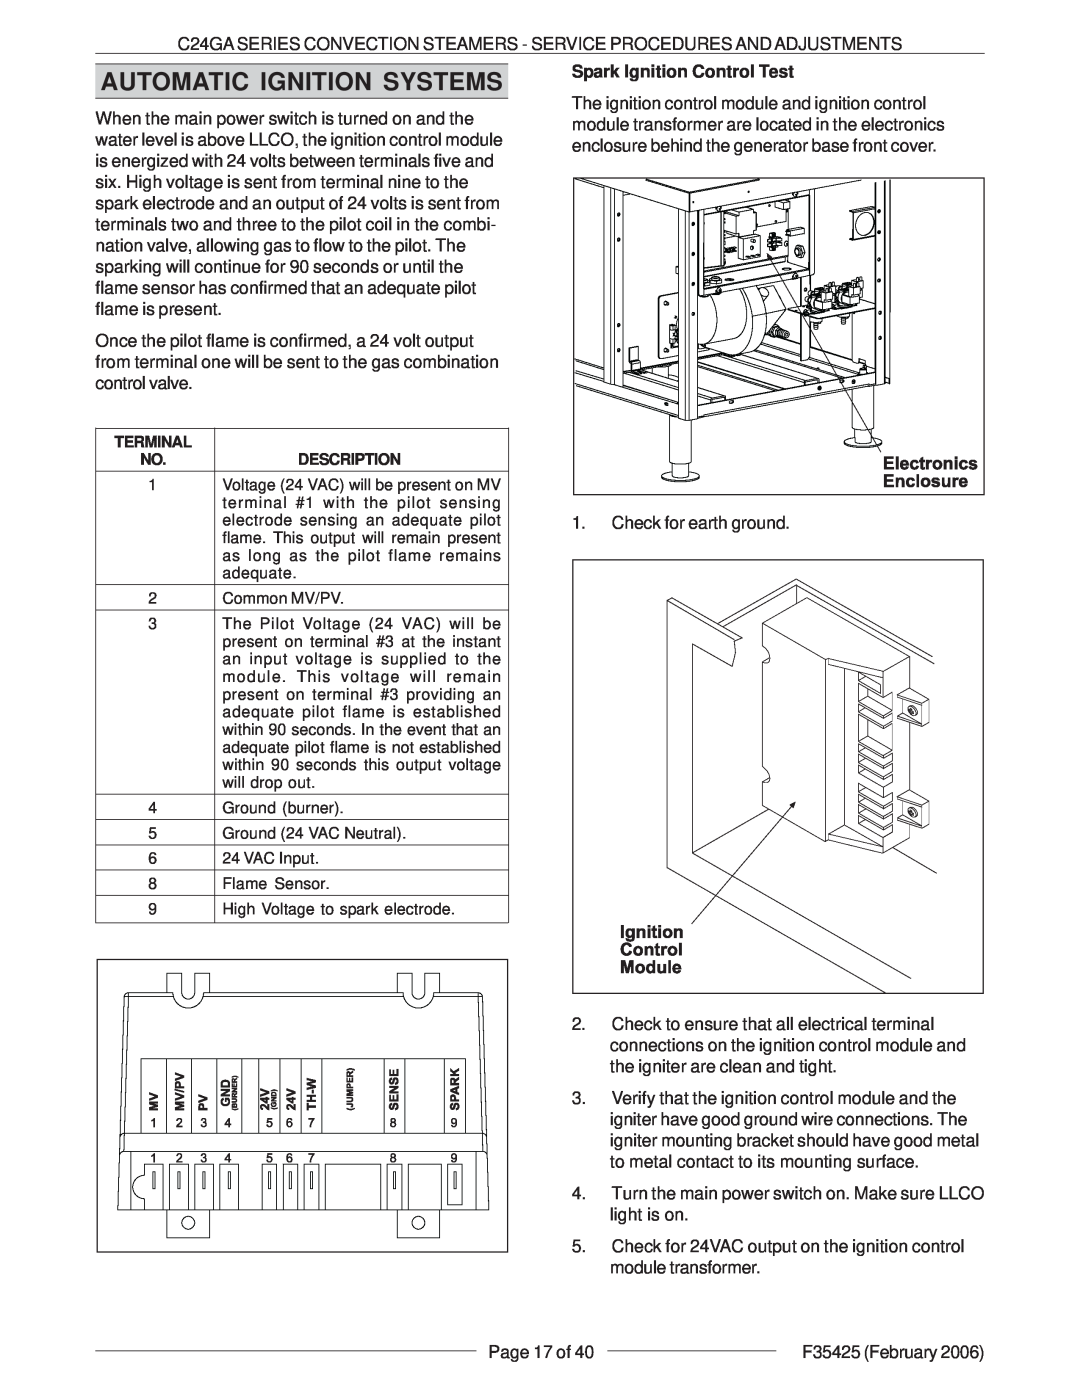 Vulcan-Hart C24GA6 ML-136021, C24GA10 ML-136022 service manual Automatic Ignition Systems, Spark Ignition Control Test 